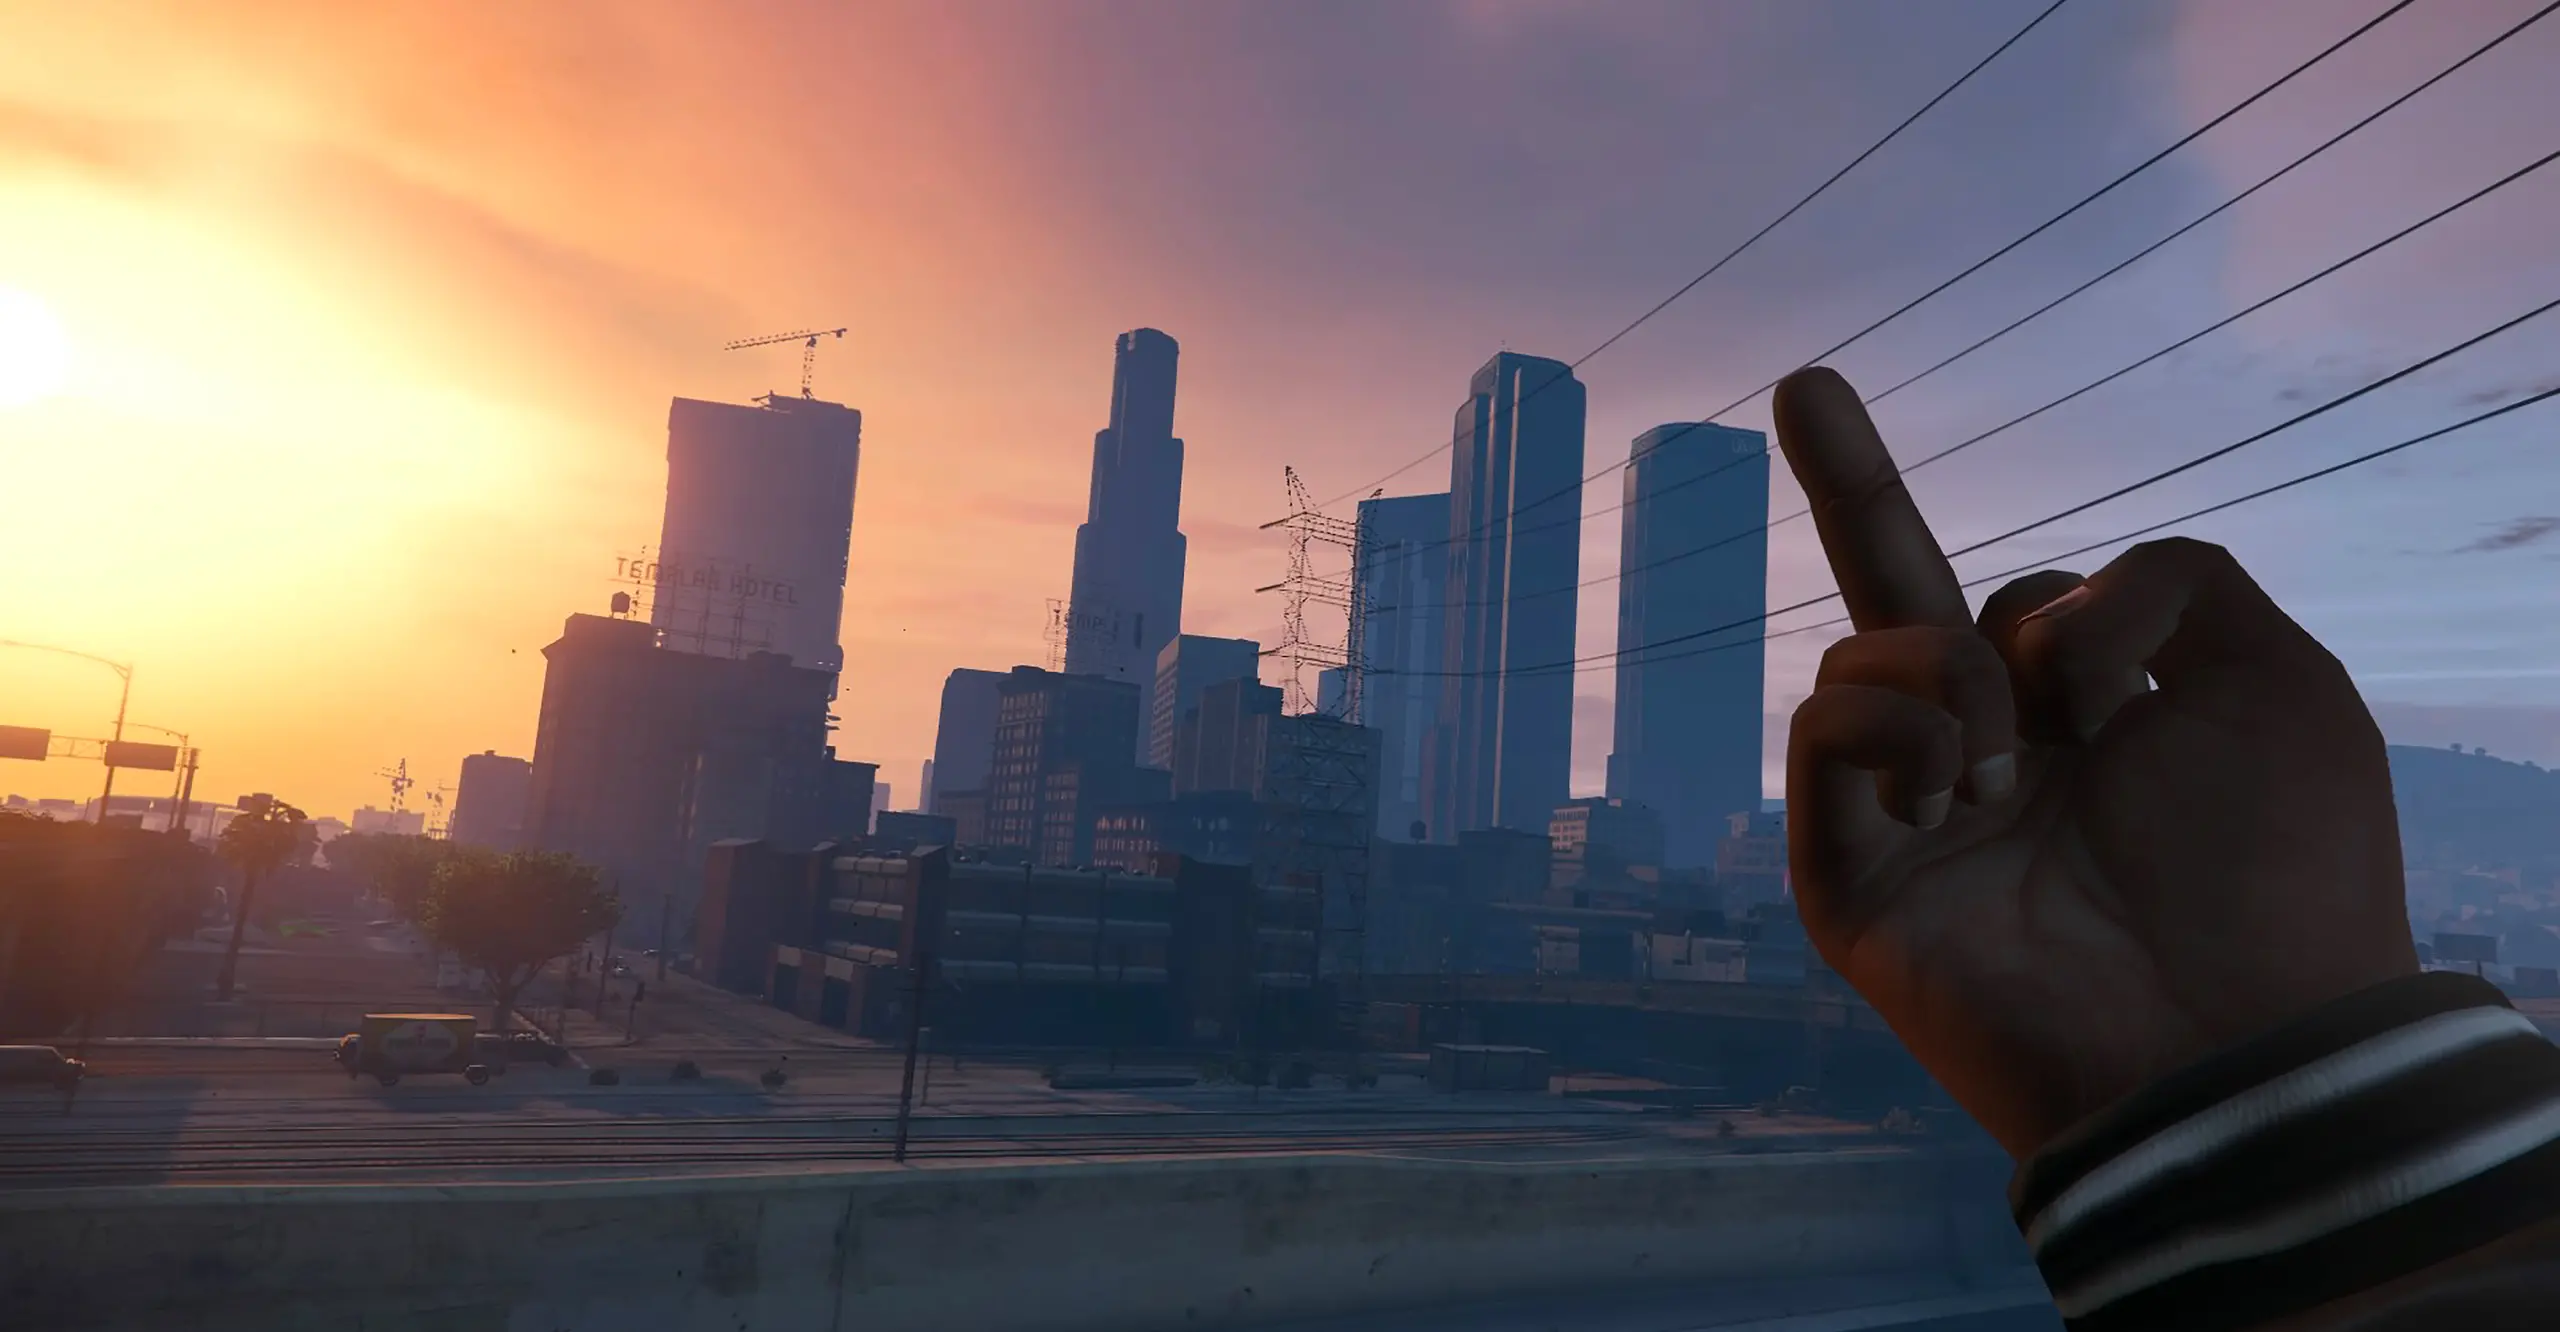 A still from a video game showing a hand giving the middle finger to the skyline of a city on sunset